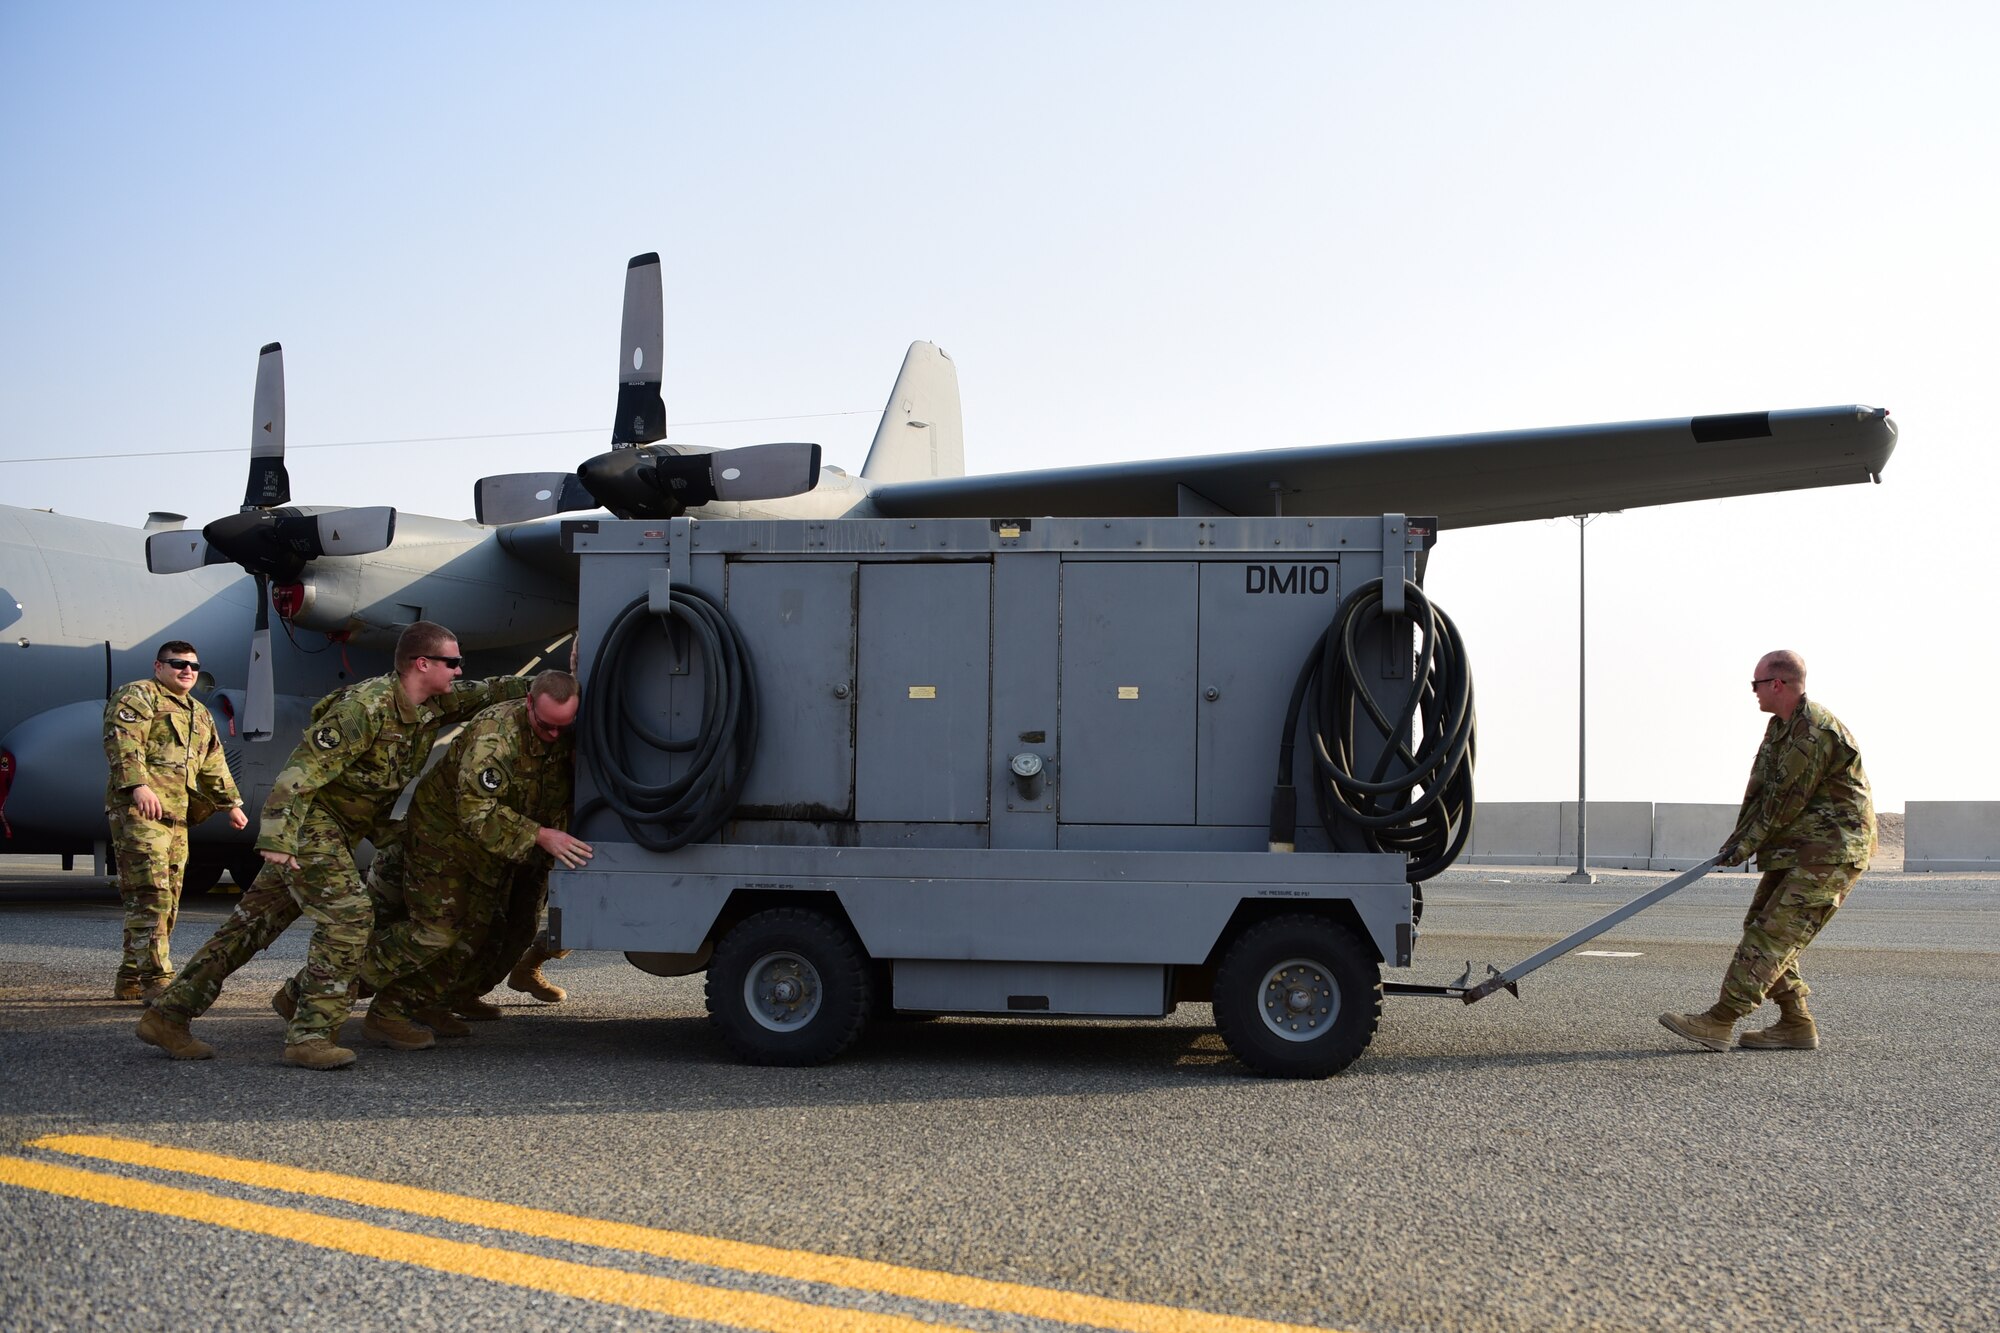 Maintainers from the 386th Expeditionary Aircraft Maintenance Squadron drag a ground power unit away from a 43rd Expeditionary Electronic Combat Squadron EC-130 aircraft Sept. 21, 2018, at an undisclosed location in Southwest Asia. The EC-130 aircraft serves as a tactical weapon system since 1981 and has been modified through the years. Each update has provided the platform stronger avionics systems, radars and more powerful digital signal analysis computers and subsystems. (U.S. Air Force photo by Staff Sgt. Christopher Stoltz)